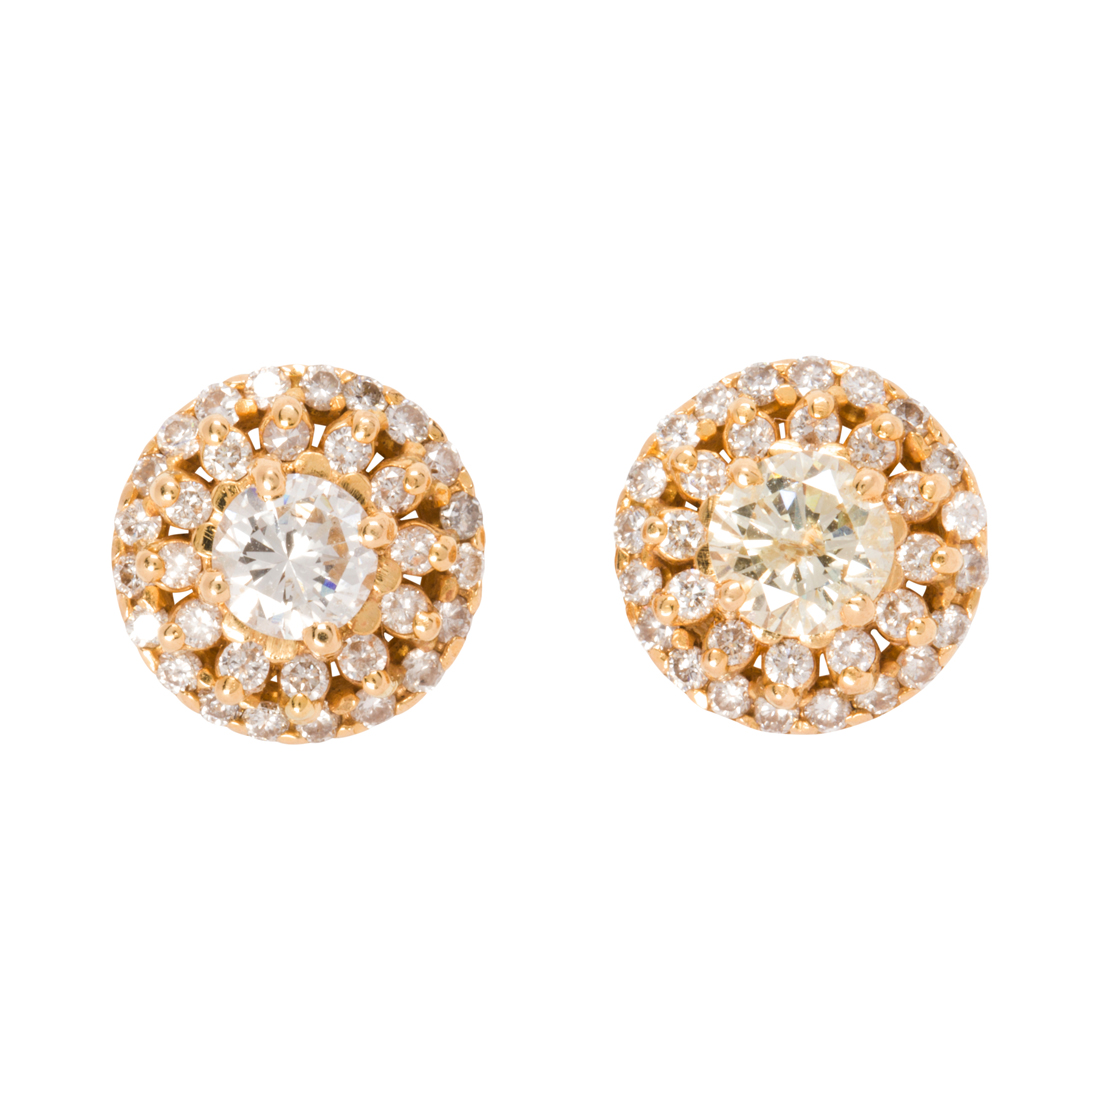 A PAIR OF DIAMOND AND 14K GOLD